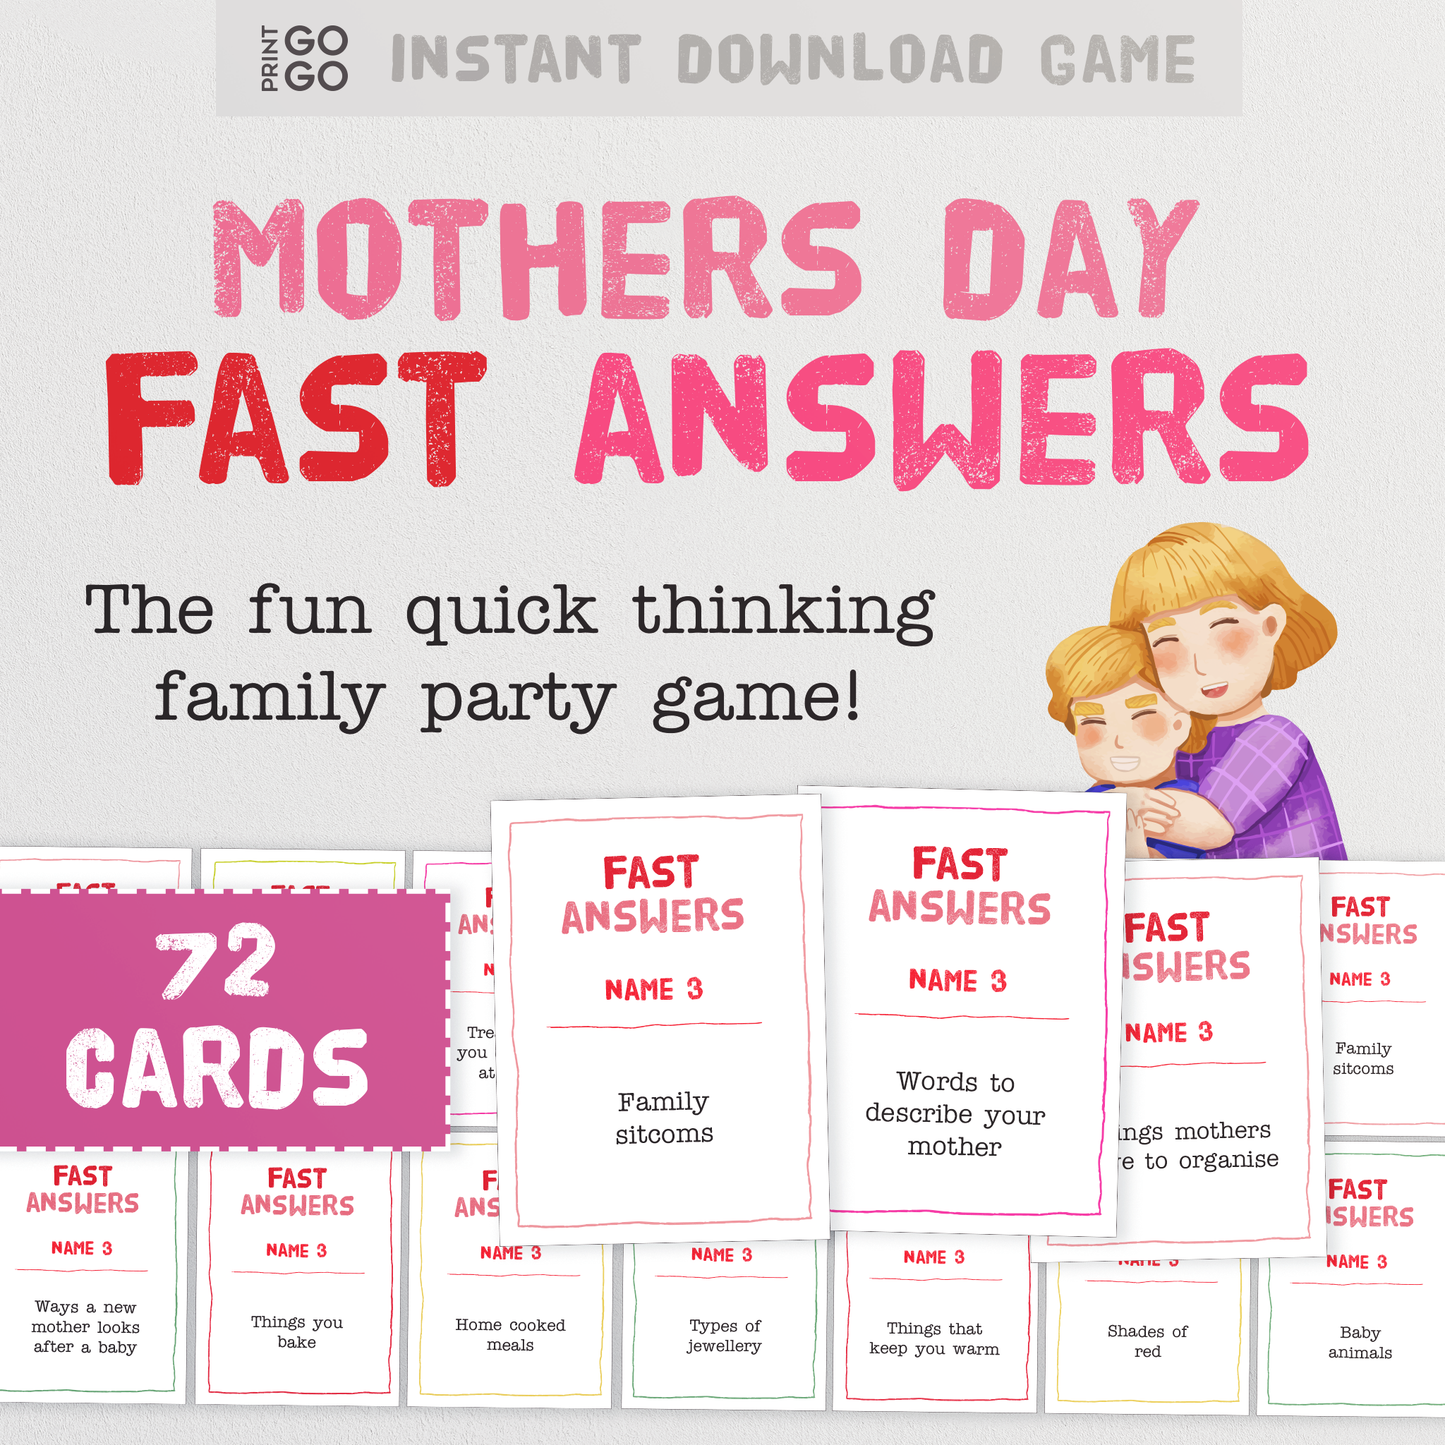 Mothers Day Fast Answers Game - The Fun Quick Thinking Family Party Game